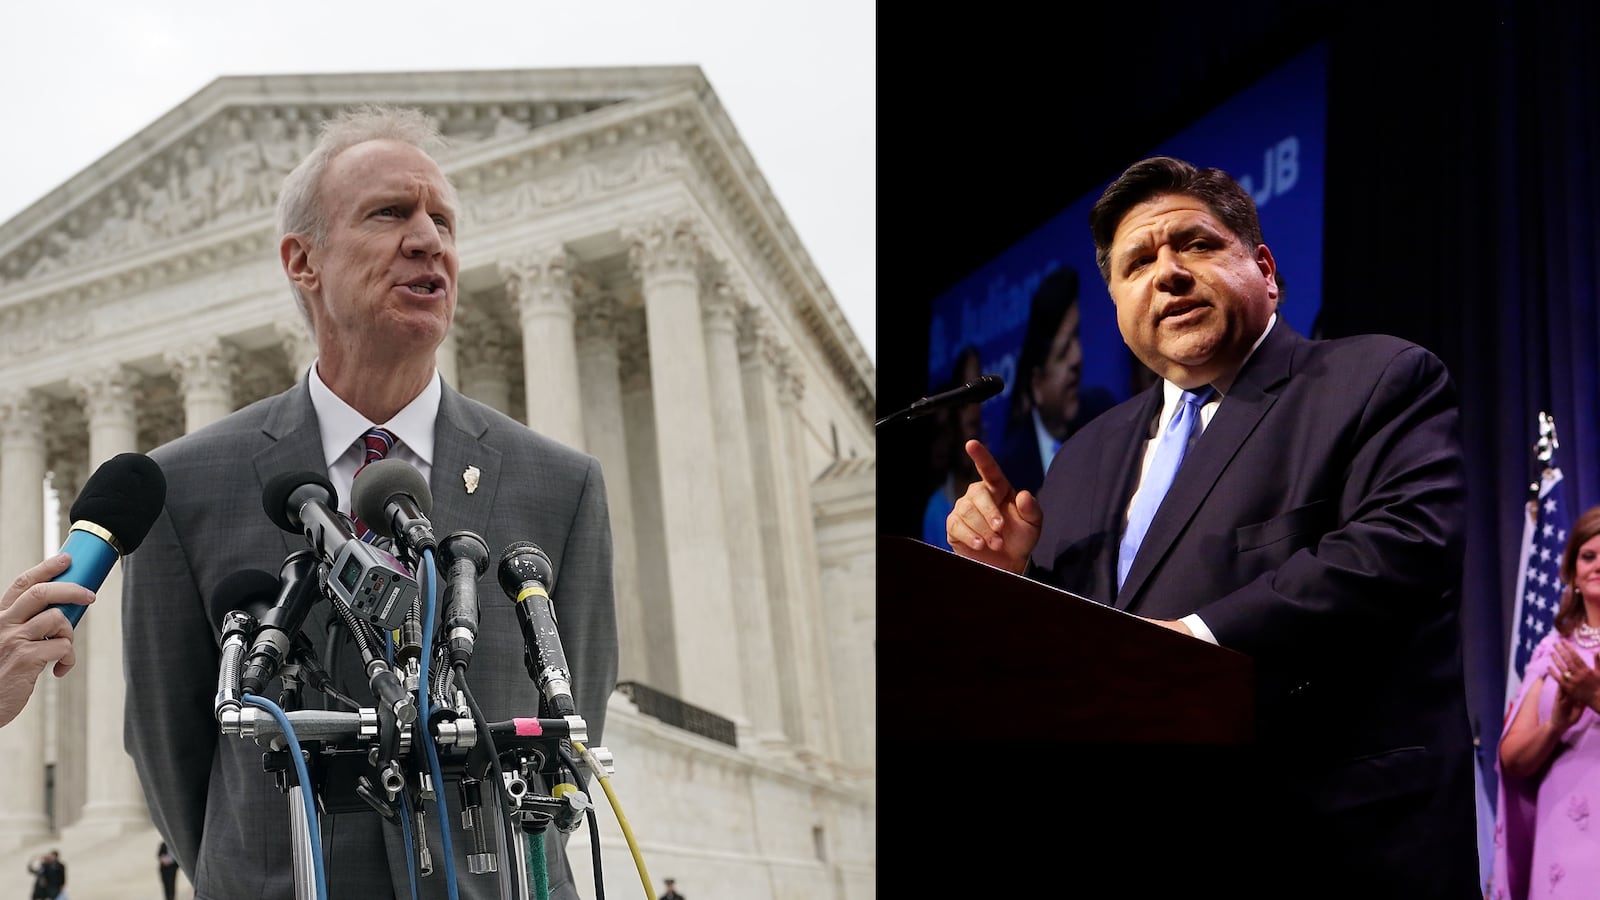 Our conversations with Gov. Bruce Rauner, left and challenger J.B. Pritzker will air Oct. 3 on WBEZ 91.5 FM.